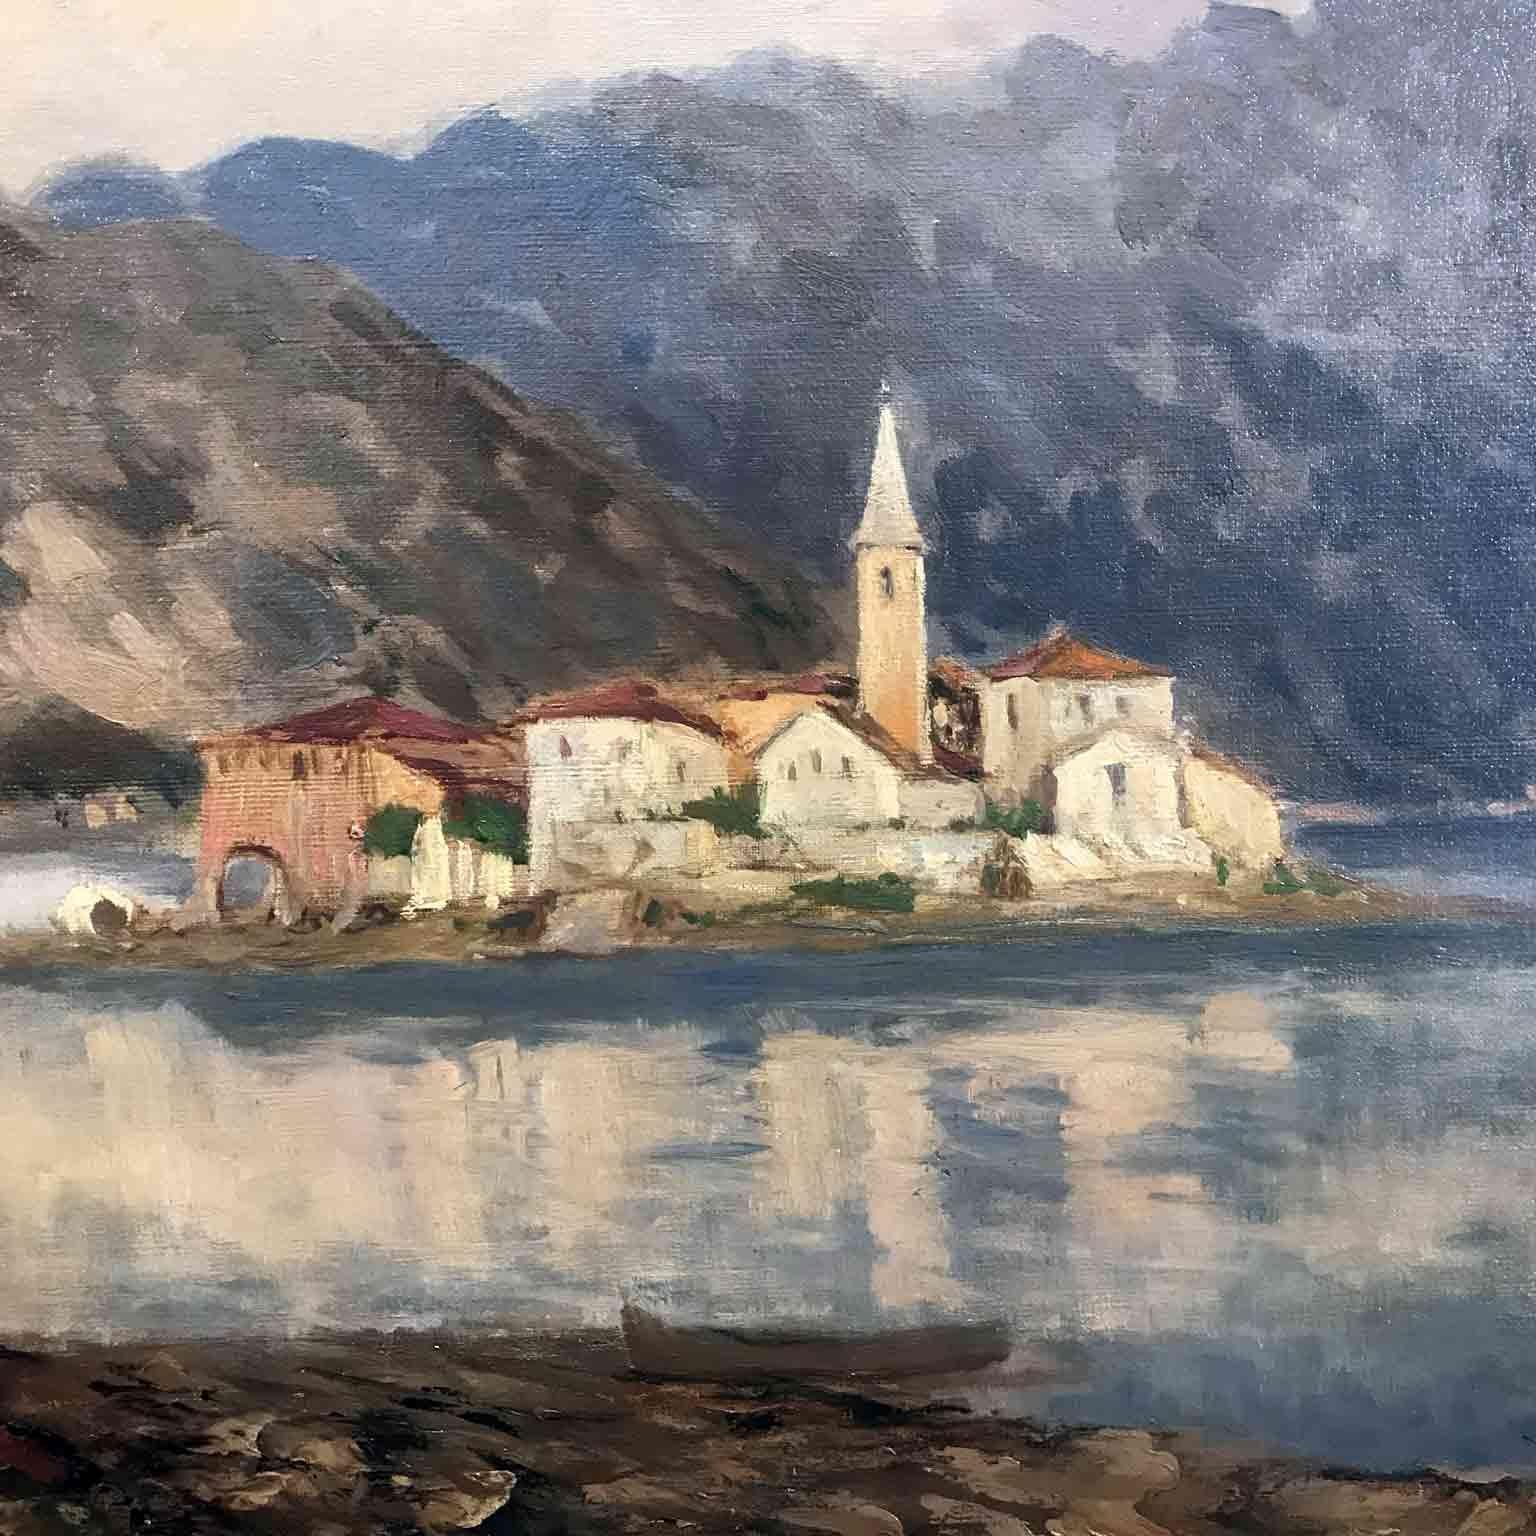 Unframed oil on canvas Lake Landscape depicting Italian Lake Maggiore view of the Isola dei Pescatori, Fishermen Island, Lago Maggiore, Italy signed lower right E. Gignous, apocrypha signature.
The painting composition is realized in the style of